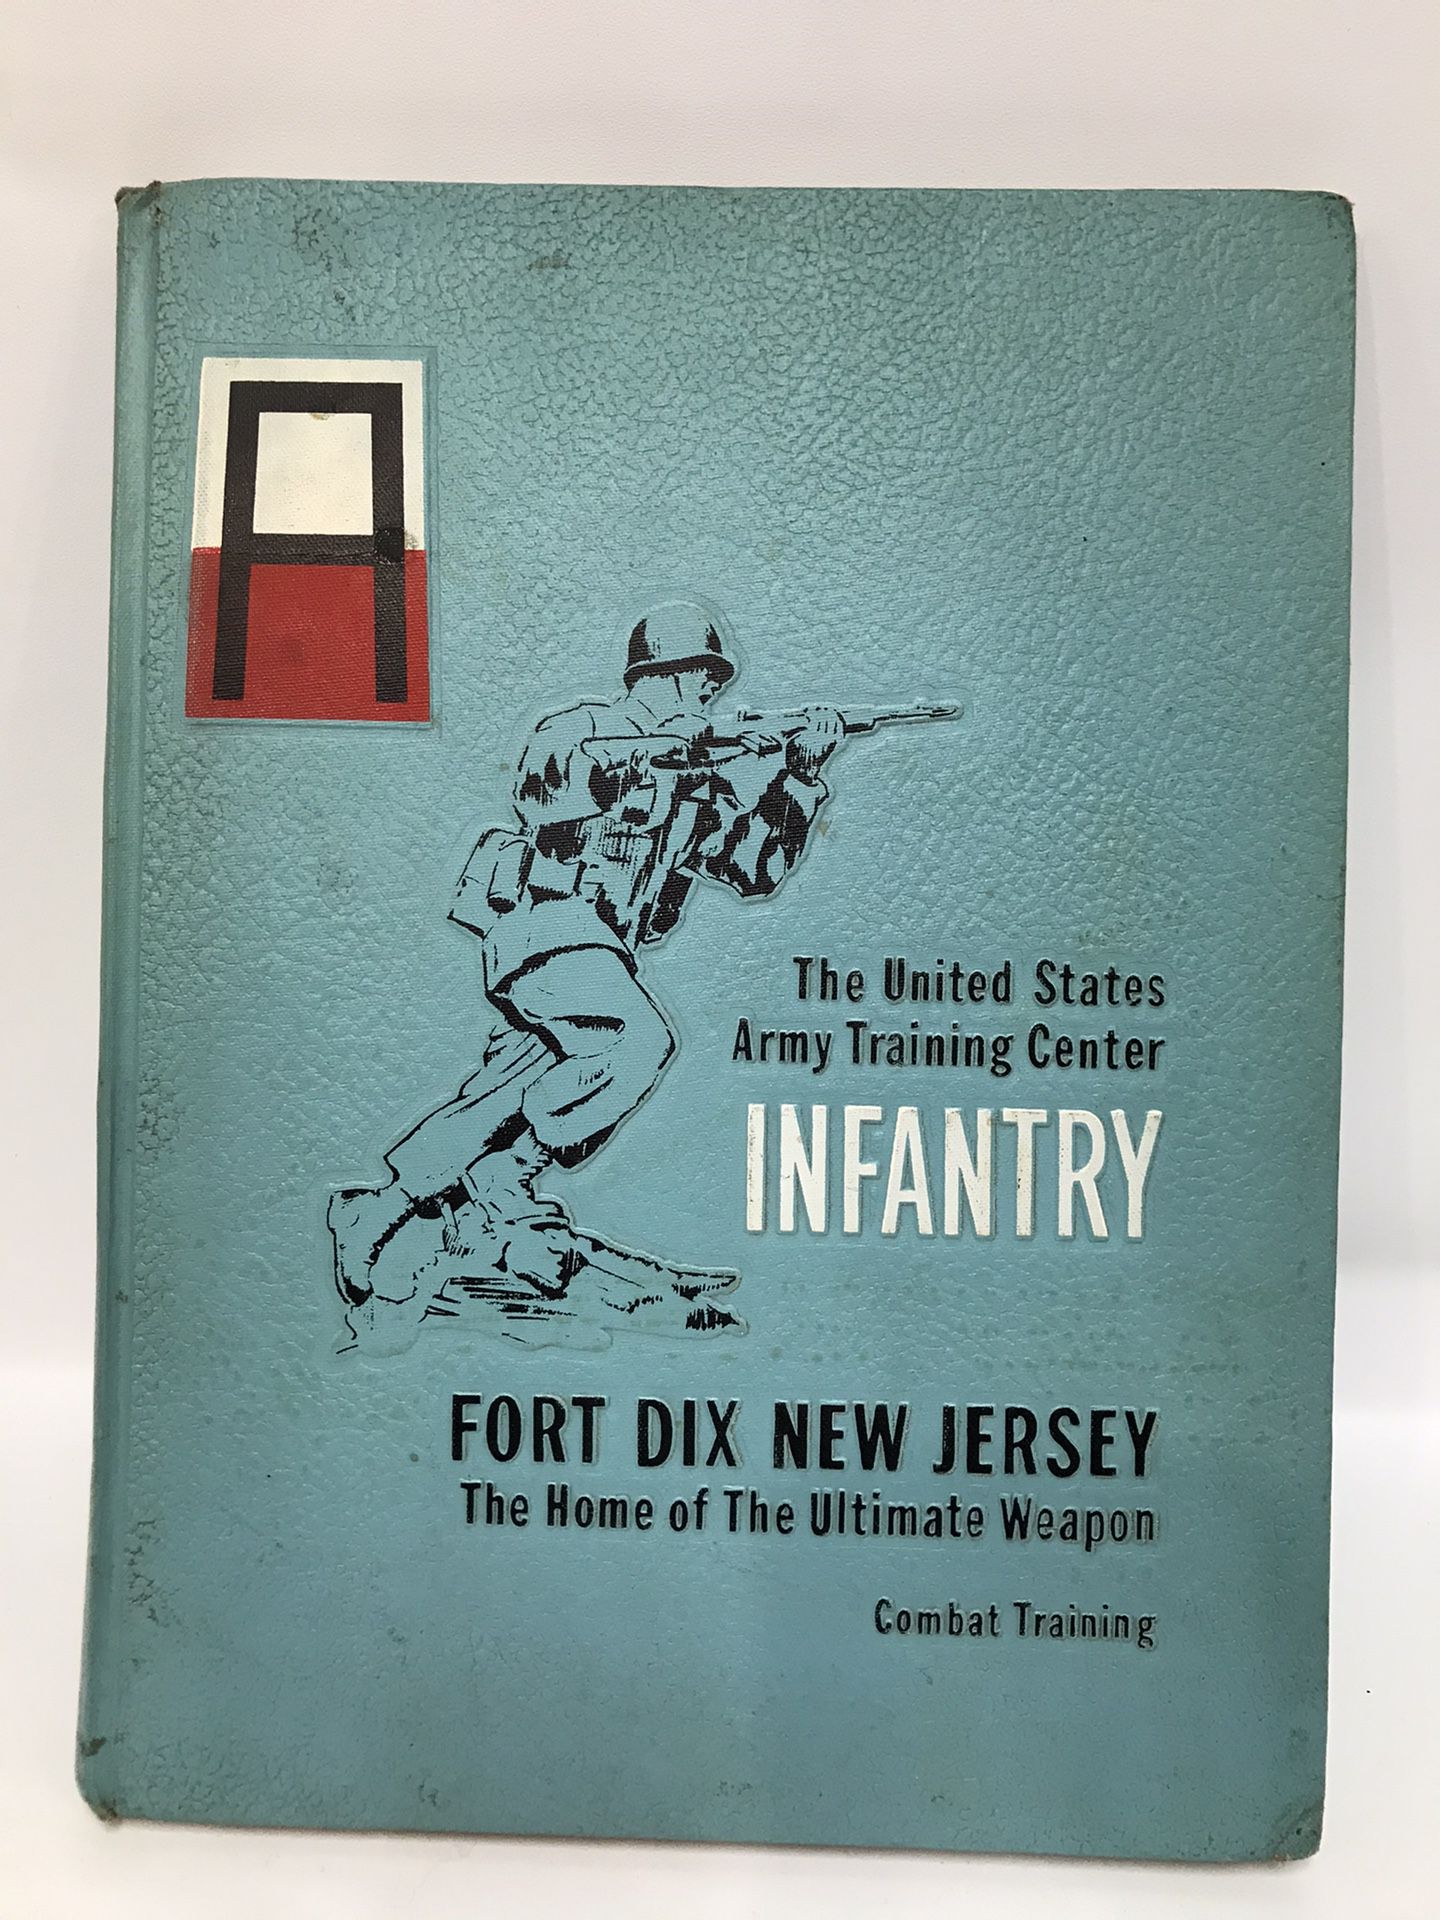 US ARMY INFANTRY TRAINING BOOK 1968